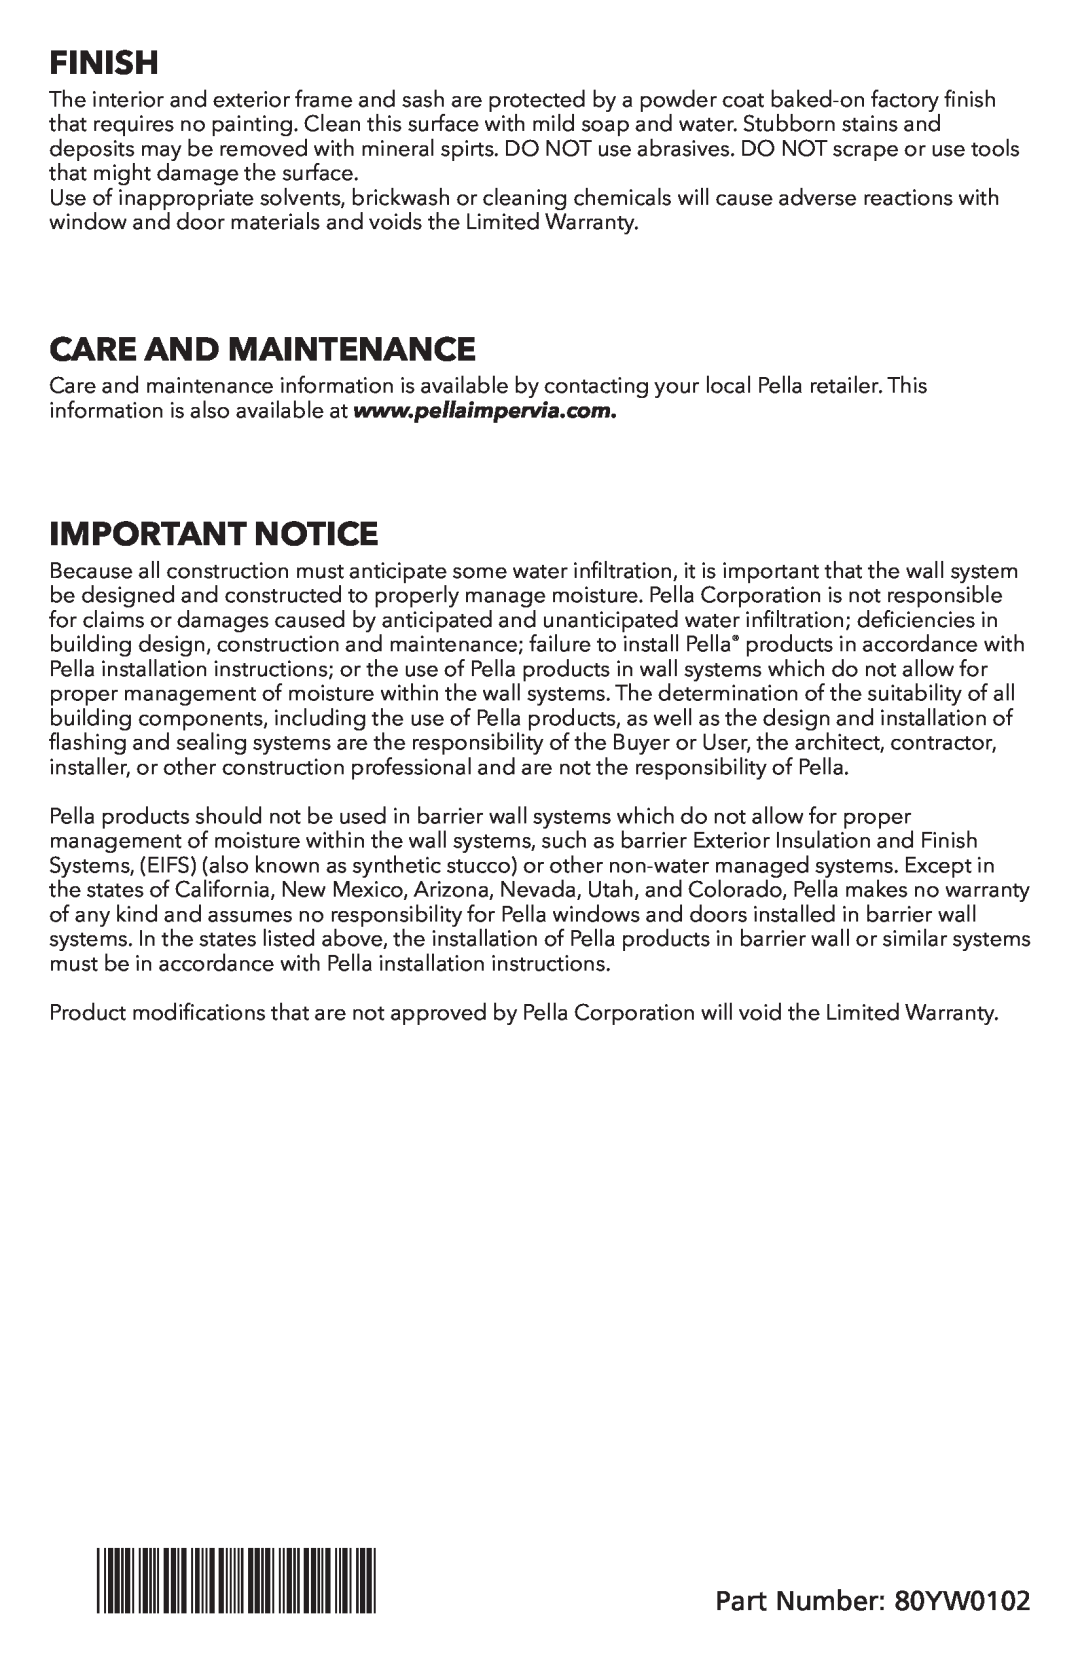 Pella warranty Finish, Care And Maintenance, Important Notice, Part Number 80YW0102 